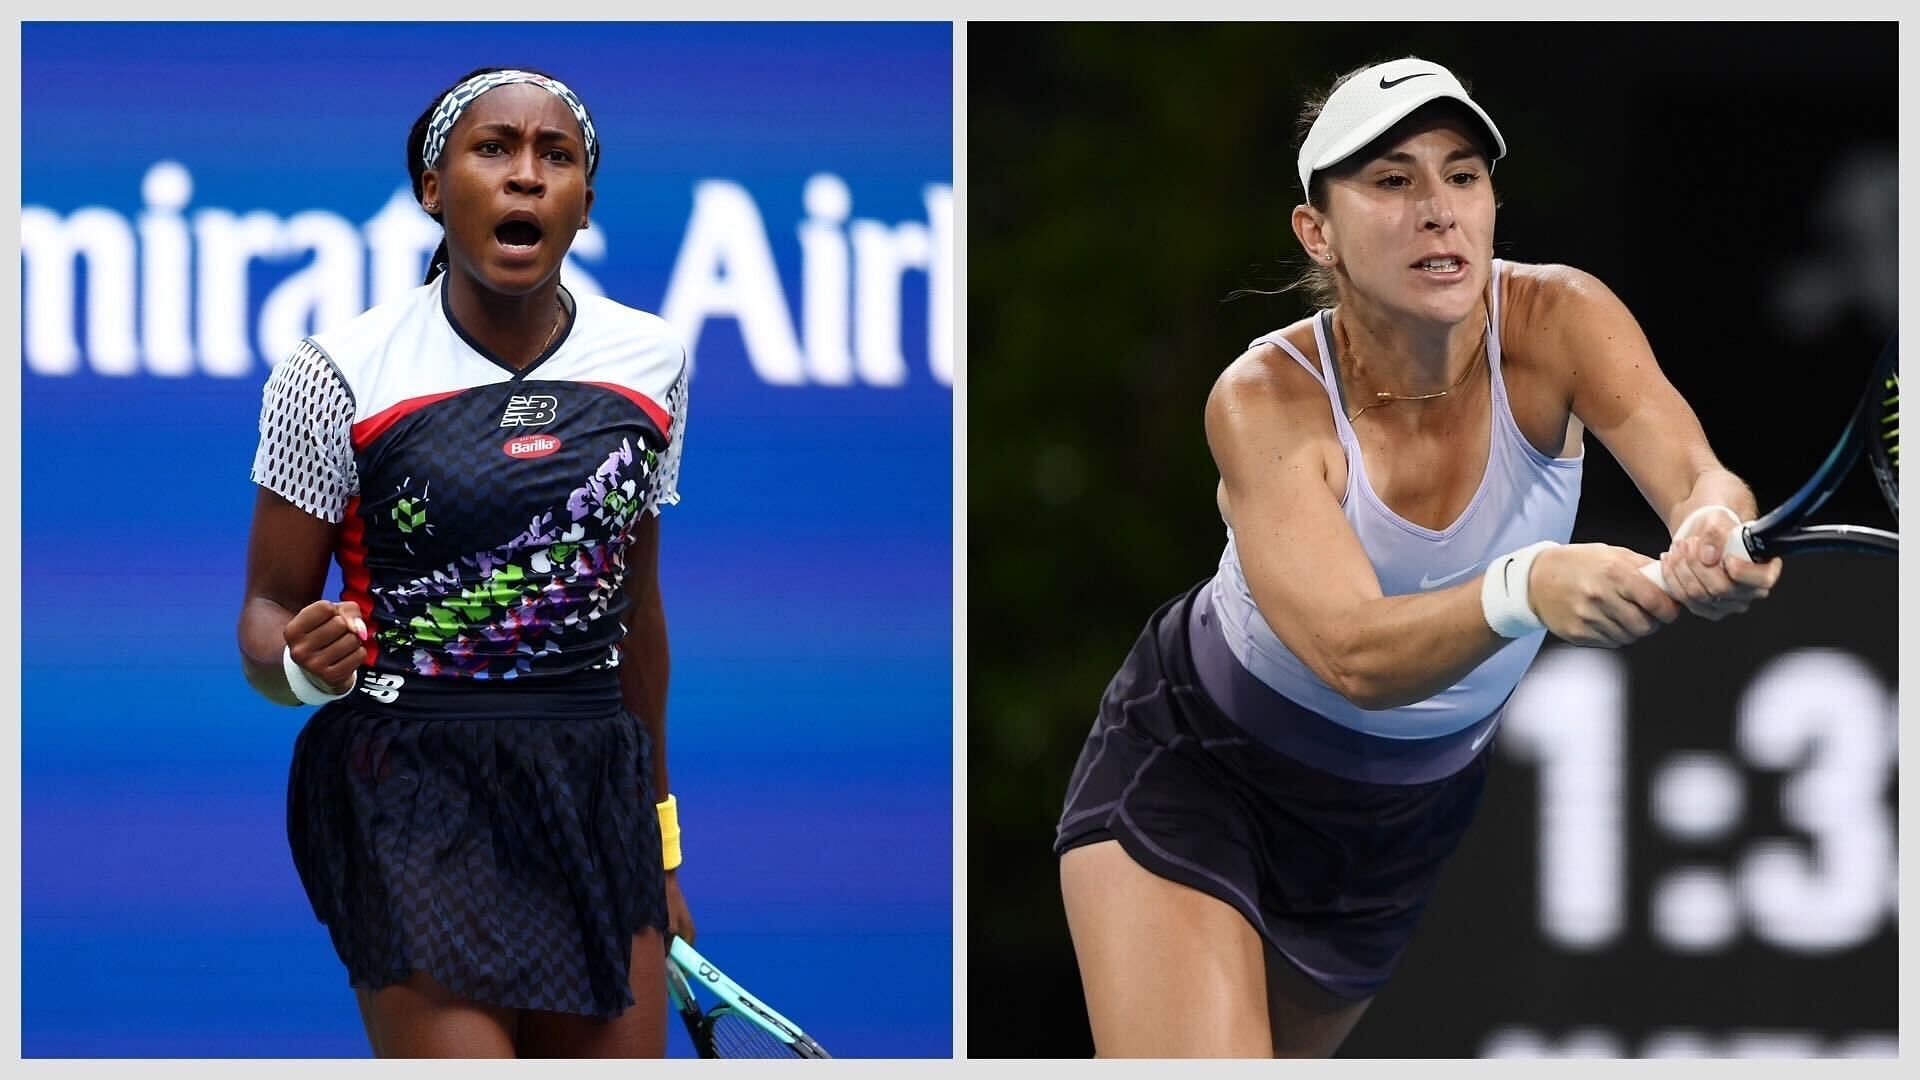 Coco Gauff vs Belinda Bencic is one of the quarterfinal matches at the 2023 Citi Open.